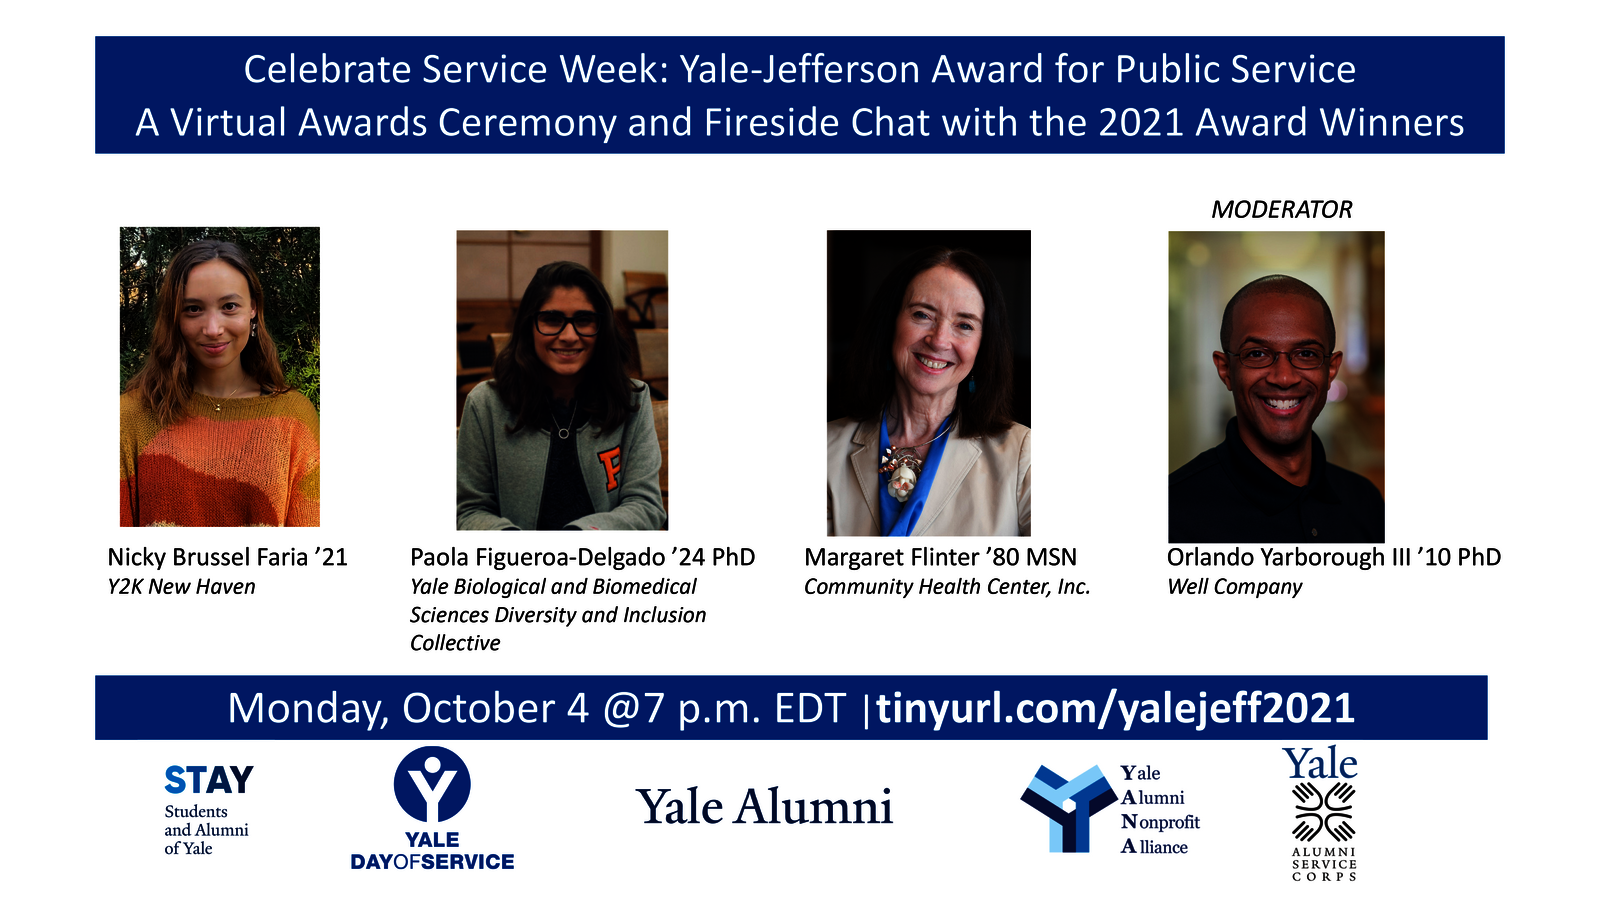 Yale-Jefferson Award for Public Service: A Virtual Awards Ceremony and Fireside Chat with the 2021 Award Recipients 